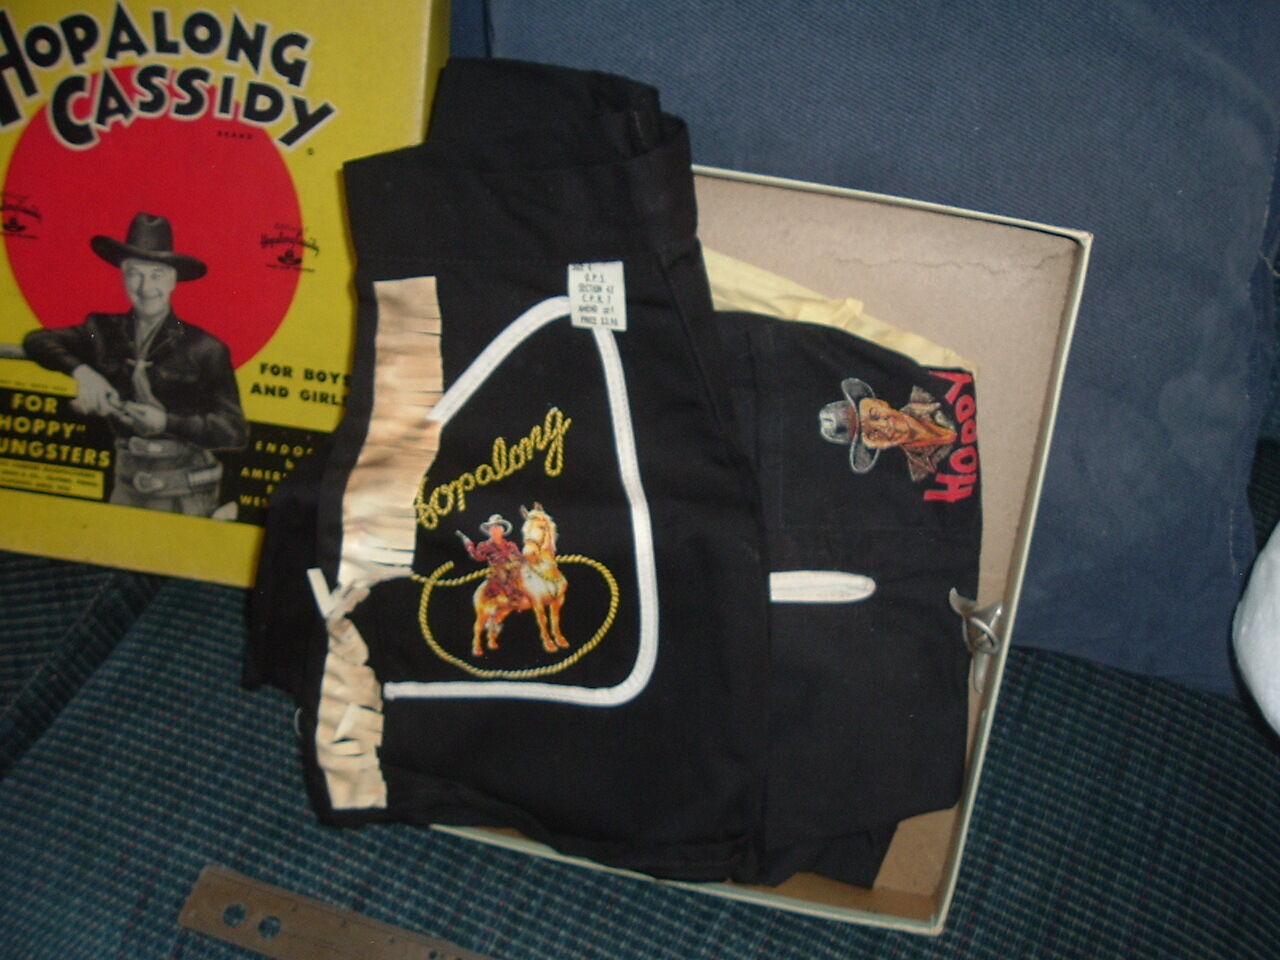 1950 Hopalong Cassidy Costume Play Outfit New In Box For Youngsters Hoppy